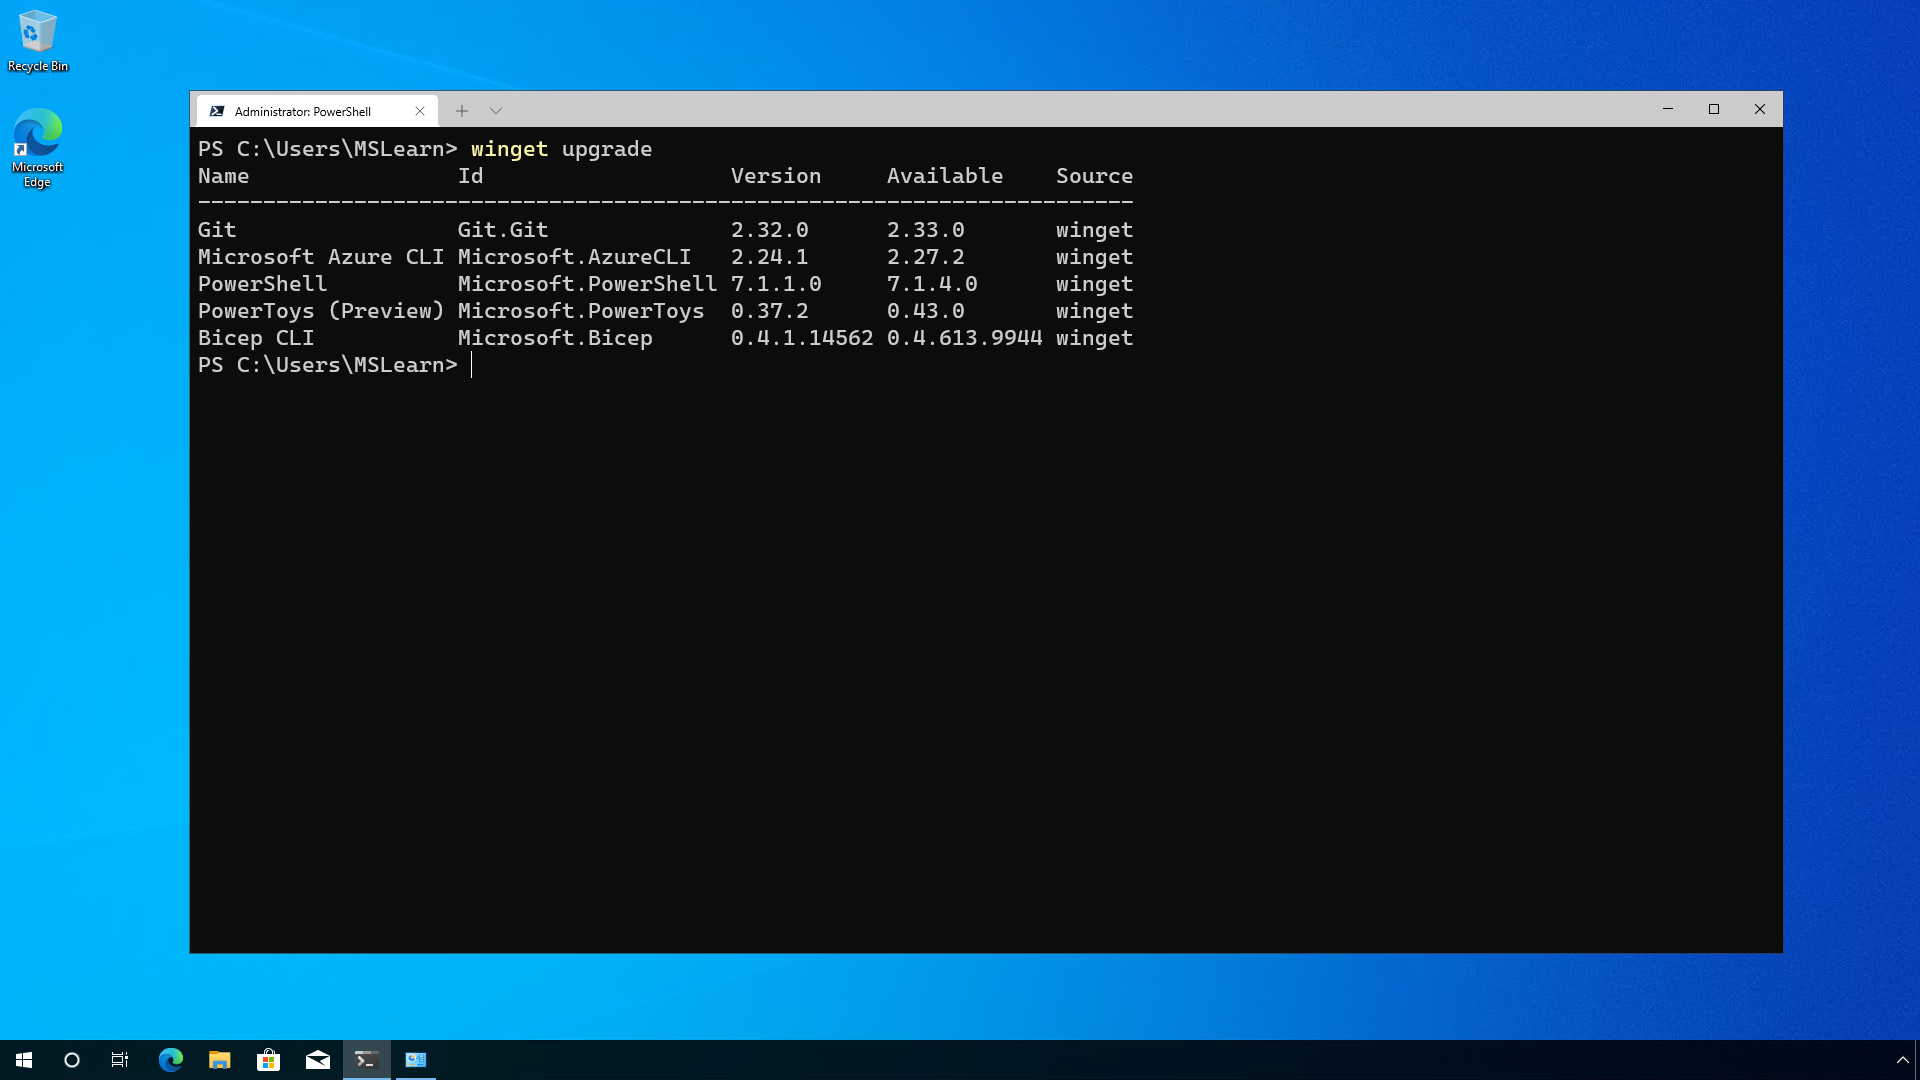 Windows Package Manager upgrade command